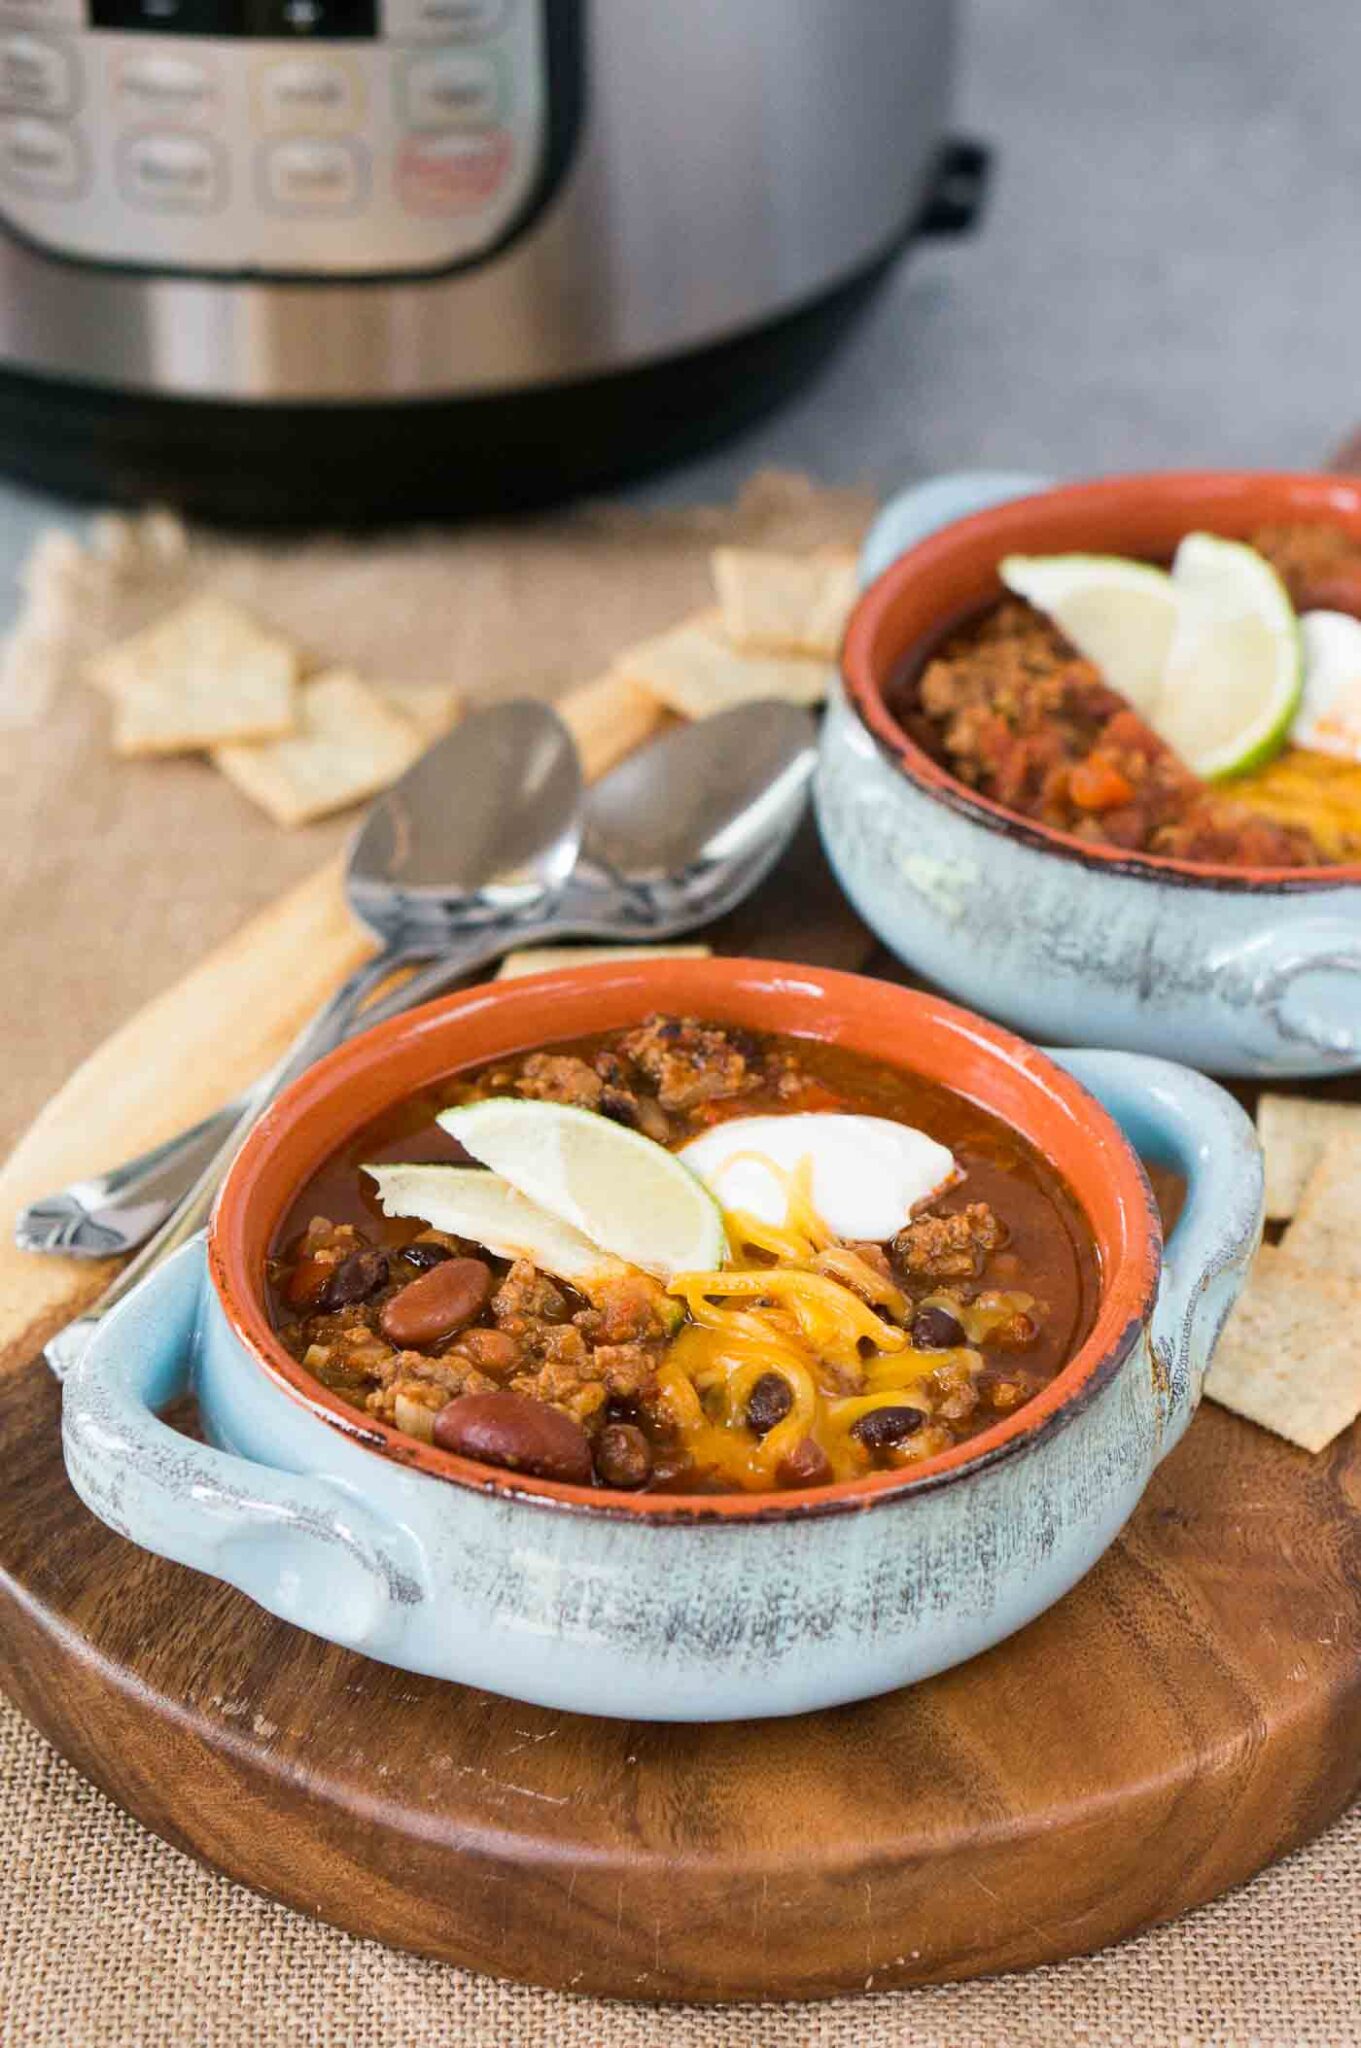 chili in bowls with pressure cooker in background